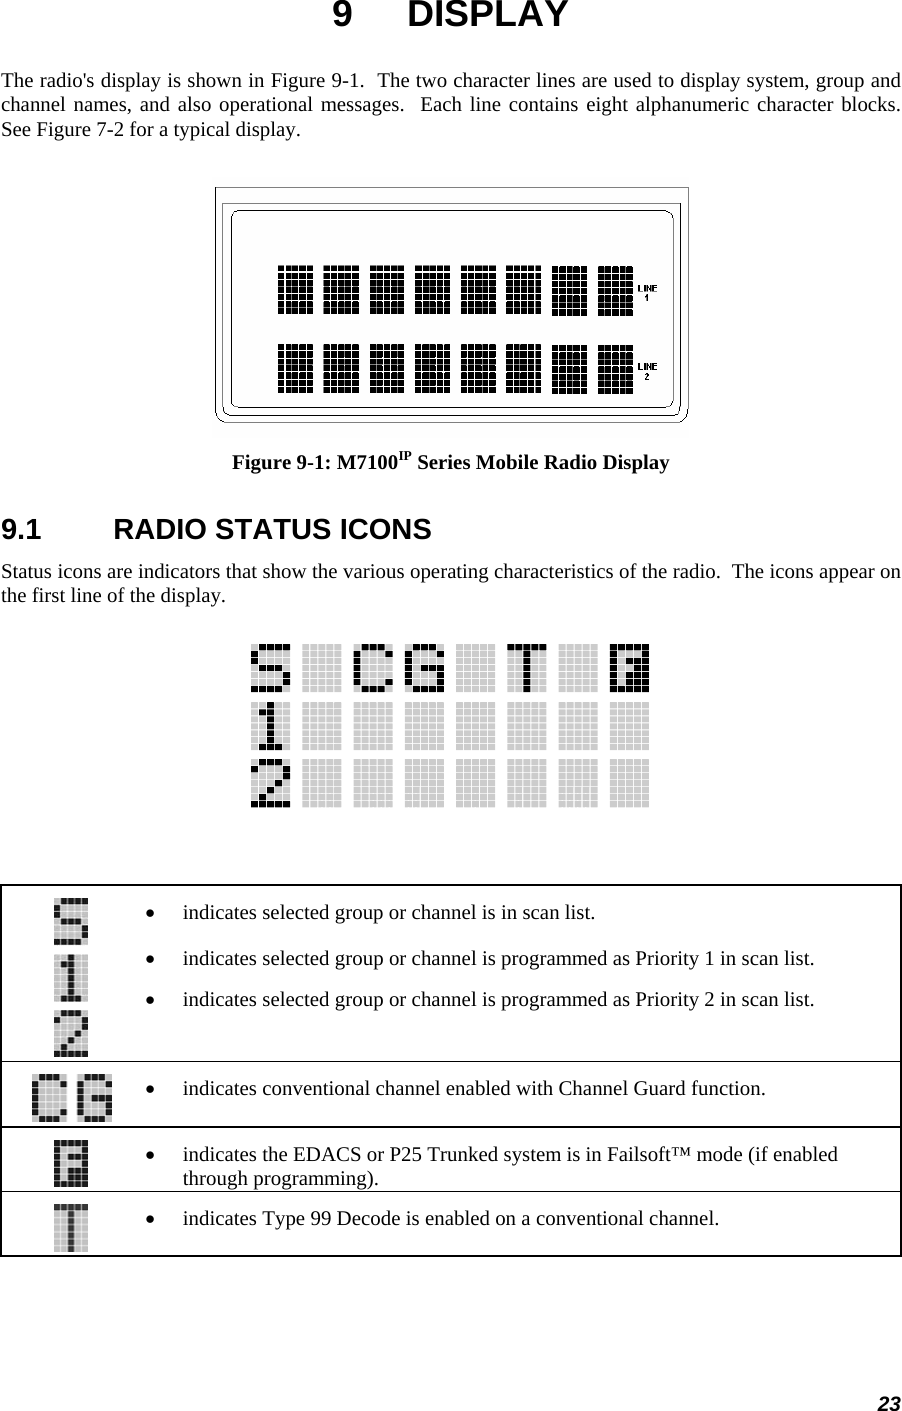 23 9 DISPLAY The radio&apos;s display is shown in Figure 9-1.  The two character lines are used to display system, group and channel names, and also operational messages.  Each line contains eight alphanumeric character blocks.  See Figure 7-2 for a typical display.   Figure 9-1: M7100IP Series Mobile Radio Display 9.1  RADIO STATUS ICONS Status icons are indicators that show the various operating characteristics of the radio.  The icons appear on the first line of the display.     • indicates selected group or channel is in scan list. • indicates selected group or channel is programmed as Priority 1 in scan list. • indicates selected group or channel is programmed as Priority 2 in scan list.   • indicates conventional channel enabled with Channel Guard function.   • indicates the EDACS or P25 Trunked system is in Failsoft™ mode (if enabled through programming).   • indicates Type 99 Decode is enabled on a conventional channel.  